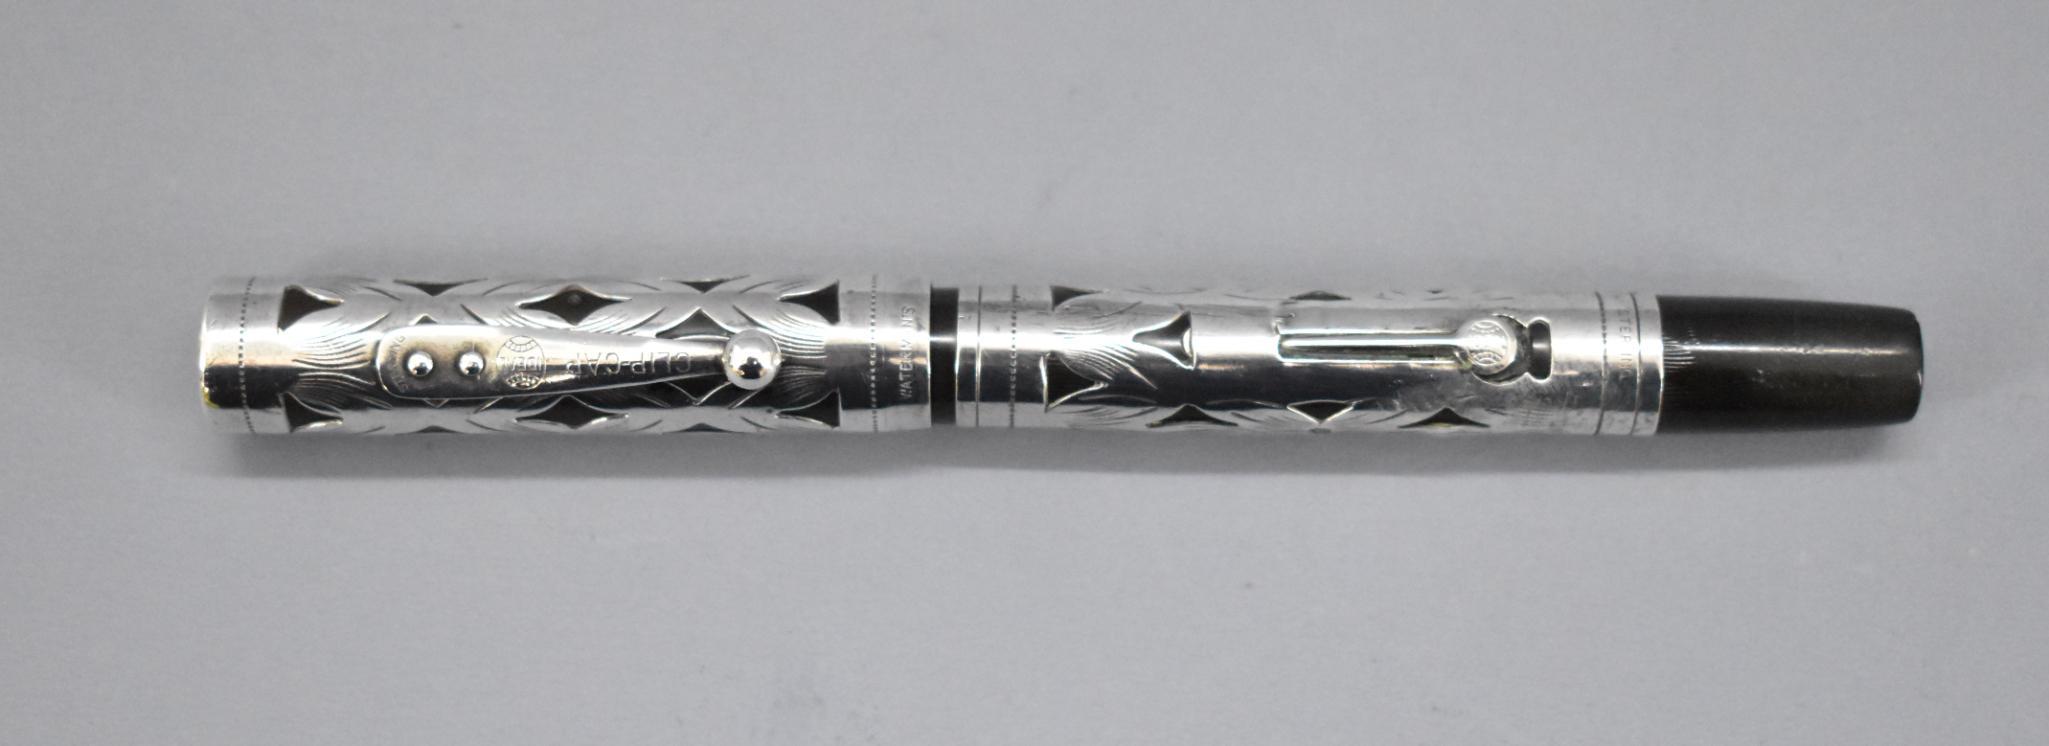 Waterman 452 fountain pen, sterling silver filigree | Toys Trains 